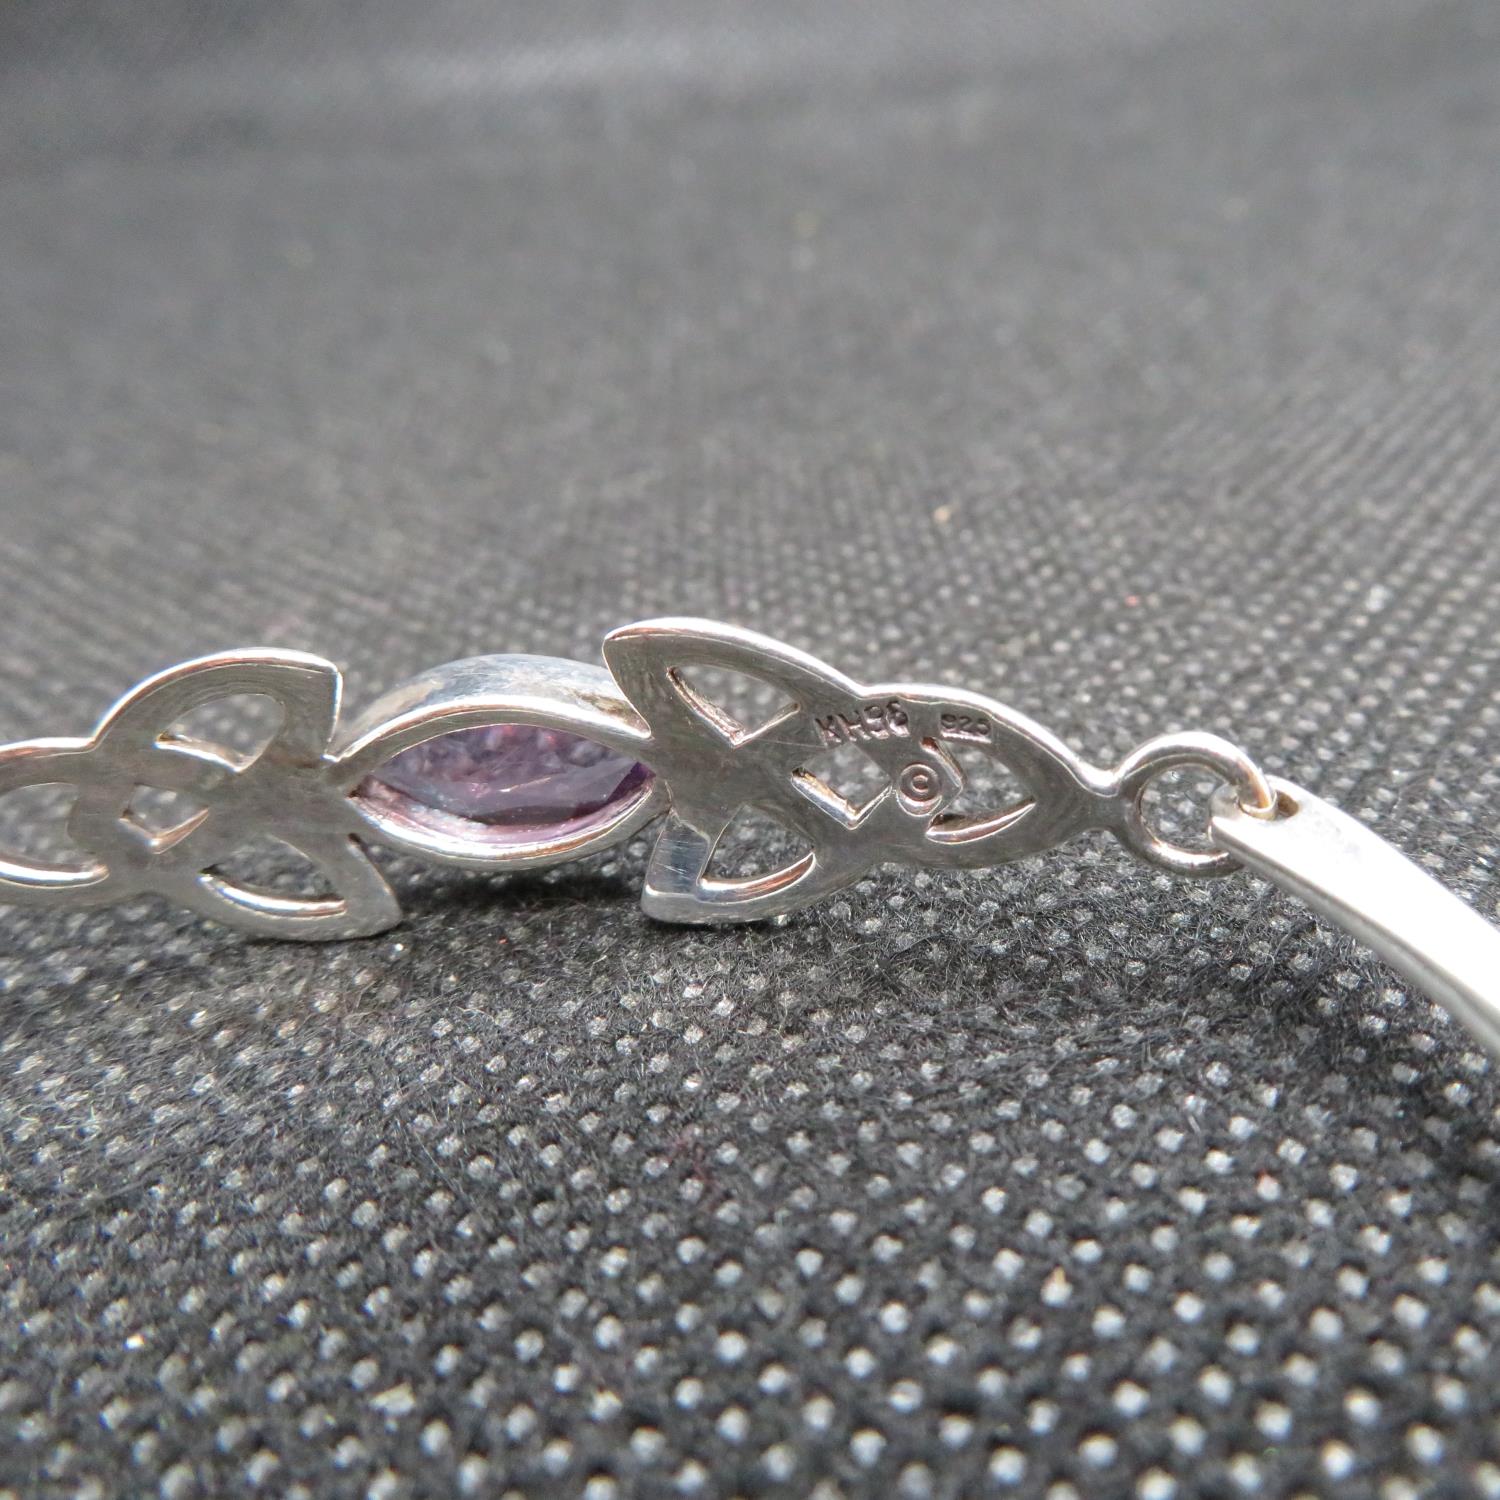 Silver Celtic style bangle by Kit Heath designs stamped KH 96 set with marquis amethyst stone 9.7g - Image 2 of 2